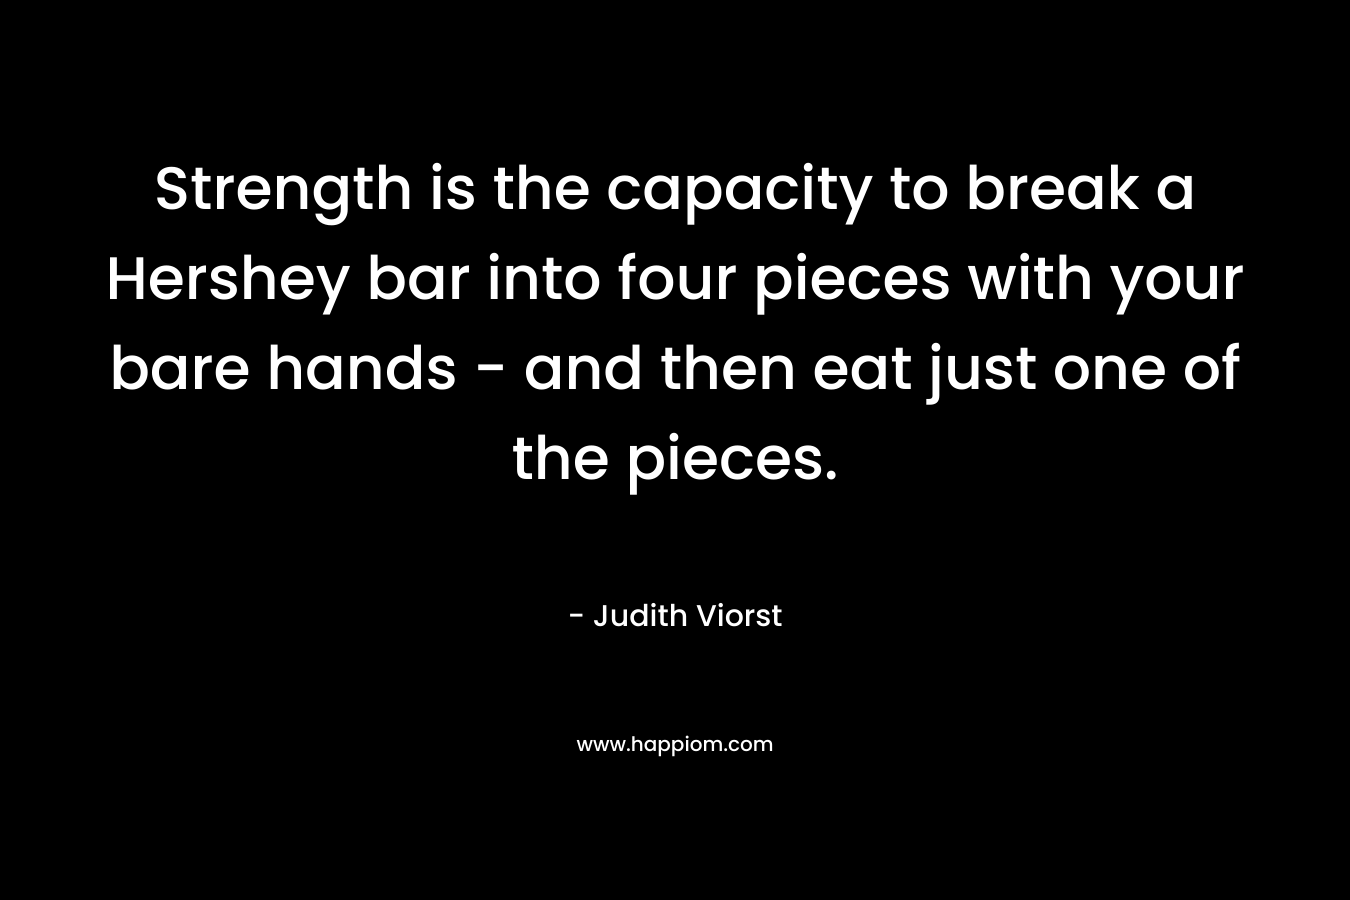 Strength is the capacity to break a Hershey bar into four pieces with your bare hands - and then eat just one of the pieces.